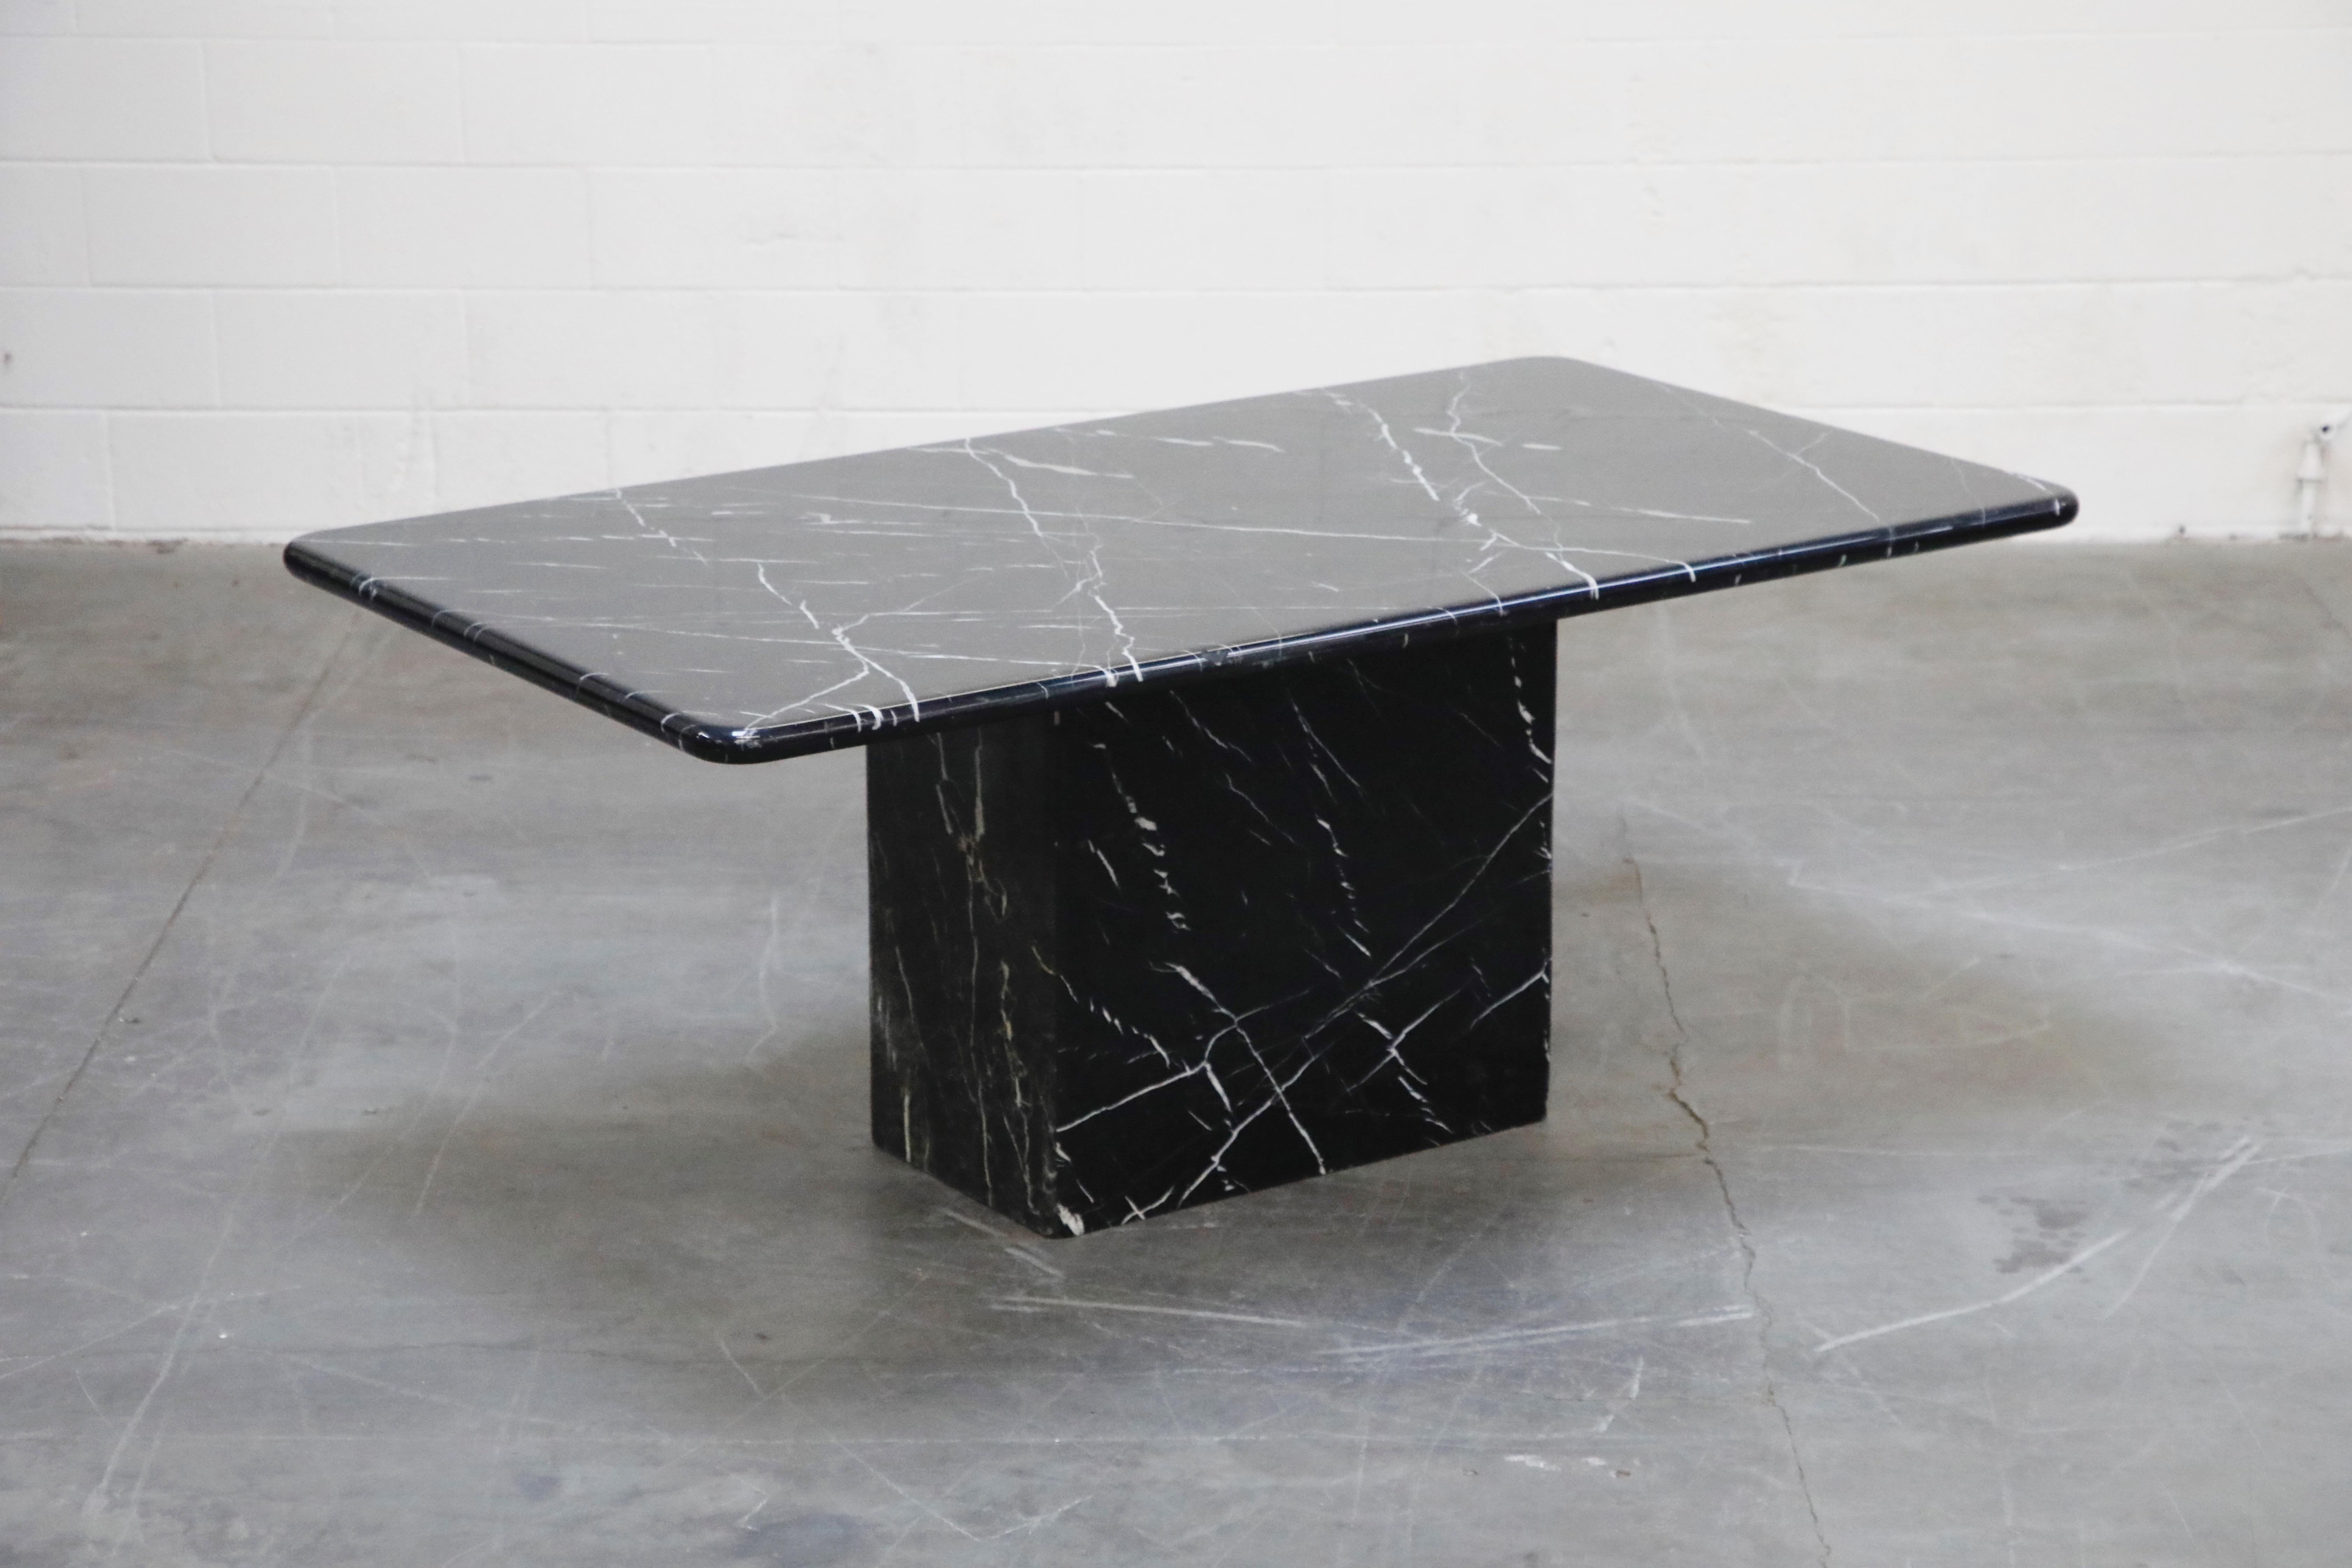 This lovely dining table is constructed of black marble with white veining and a thick protective lacquer coat over the dining table top. The base is constructed of thick marble in a rectangular form and hollow on the inside - yet is still